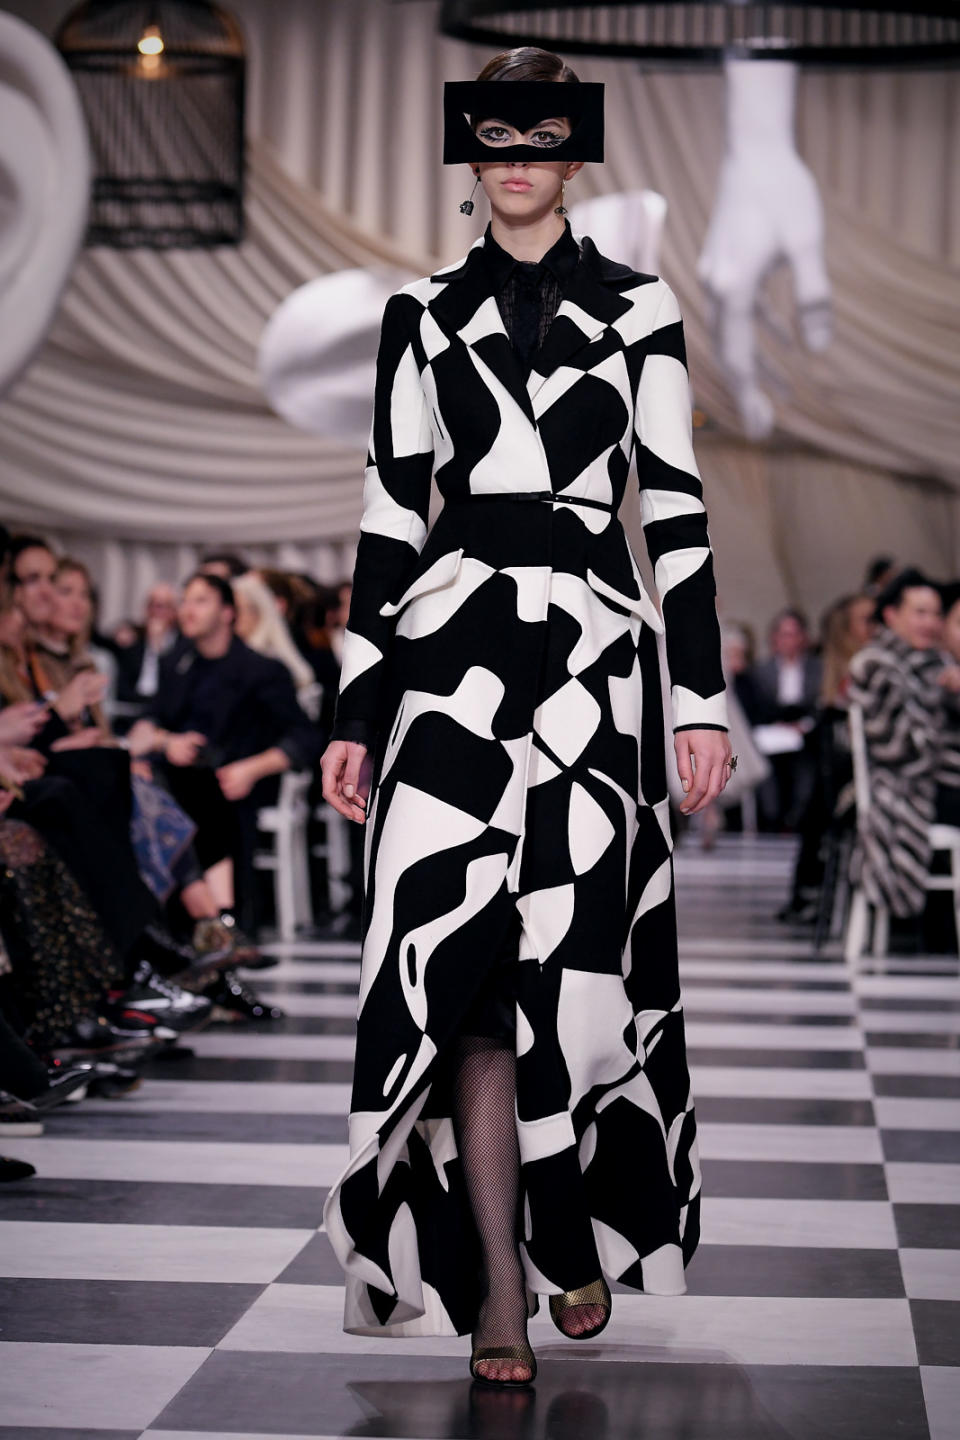 <p>A model wears a black and white “puzzle” coat and cut-out mask from the Dior Haute Couture SS18 collection. (Photo: Getty) </p>